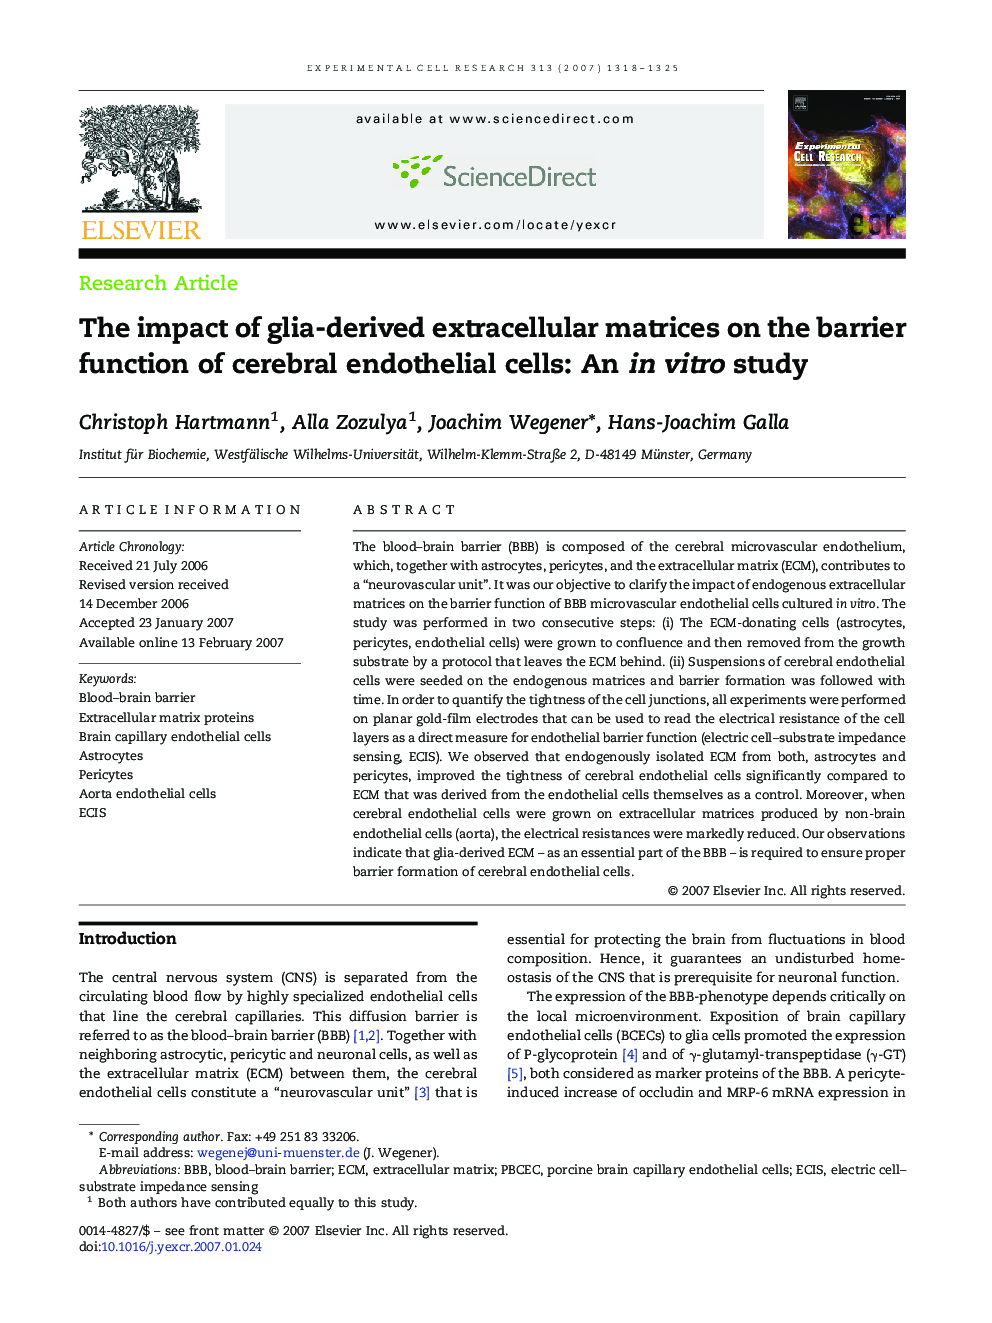 The impact of glia-derived extracellular matrices on the barrier function of cerebral endothelial cells: An in vitro study